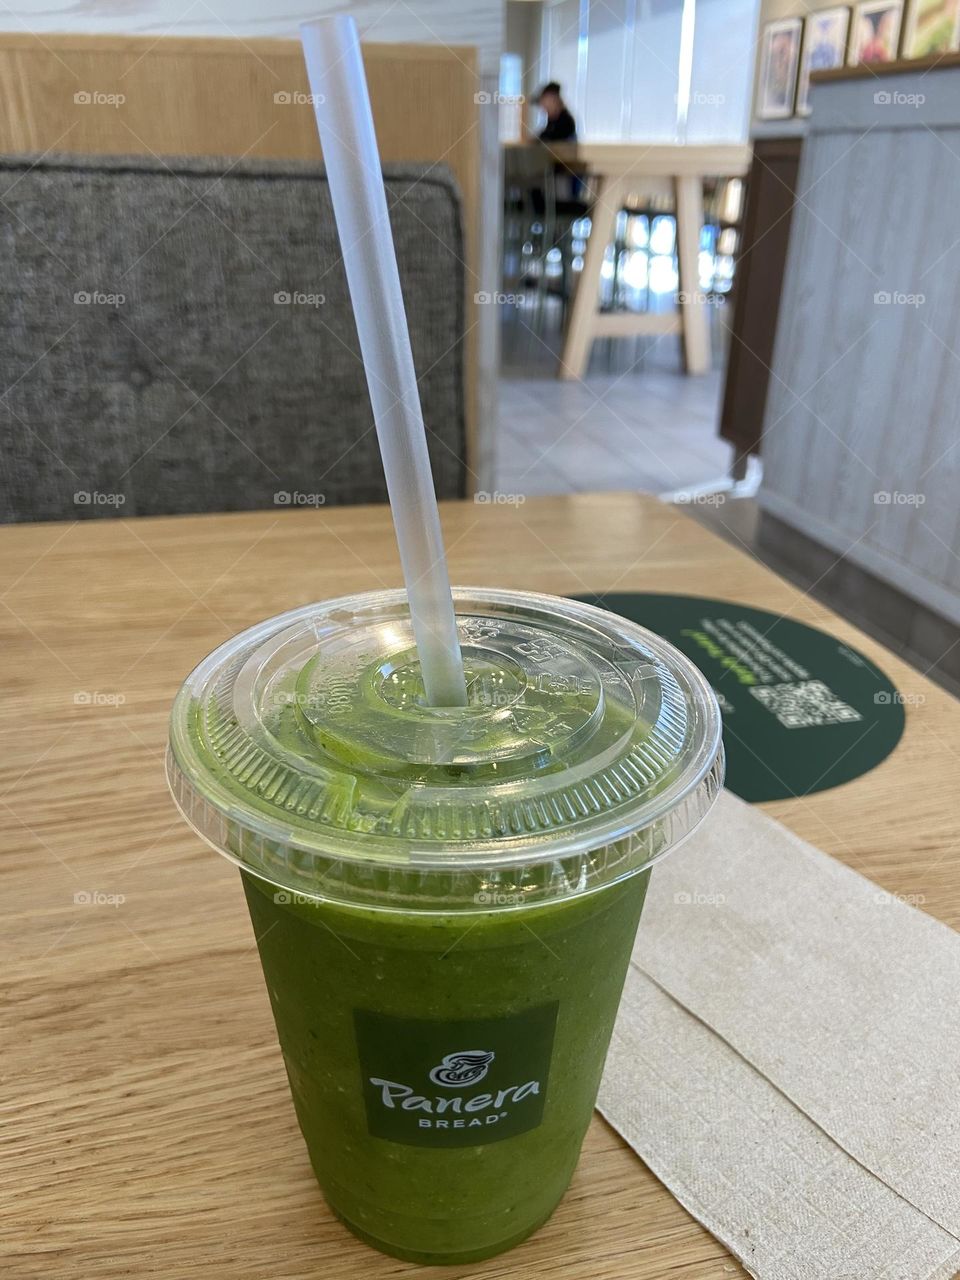 A delicious and nutritious green smoothie from Panera Bread. Made of fruit puree (peach and mango), white grape and Passionfruit concentrates, fresh spinach and ice, it’s a great way to start the day off right. 